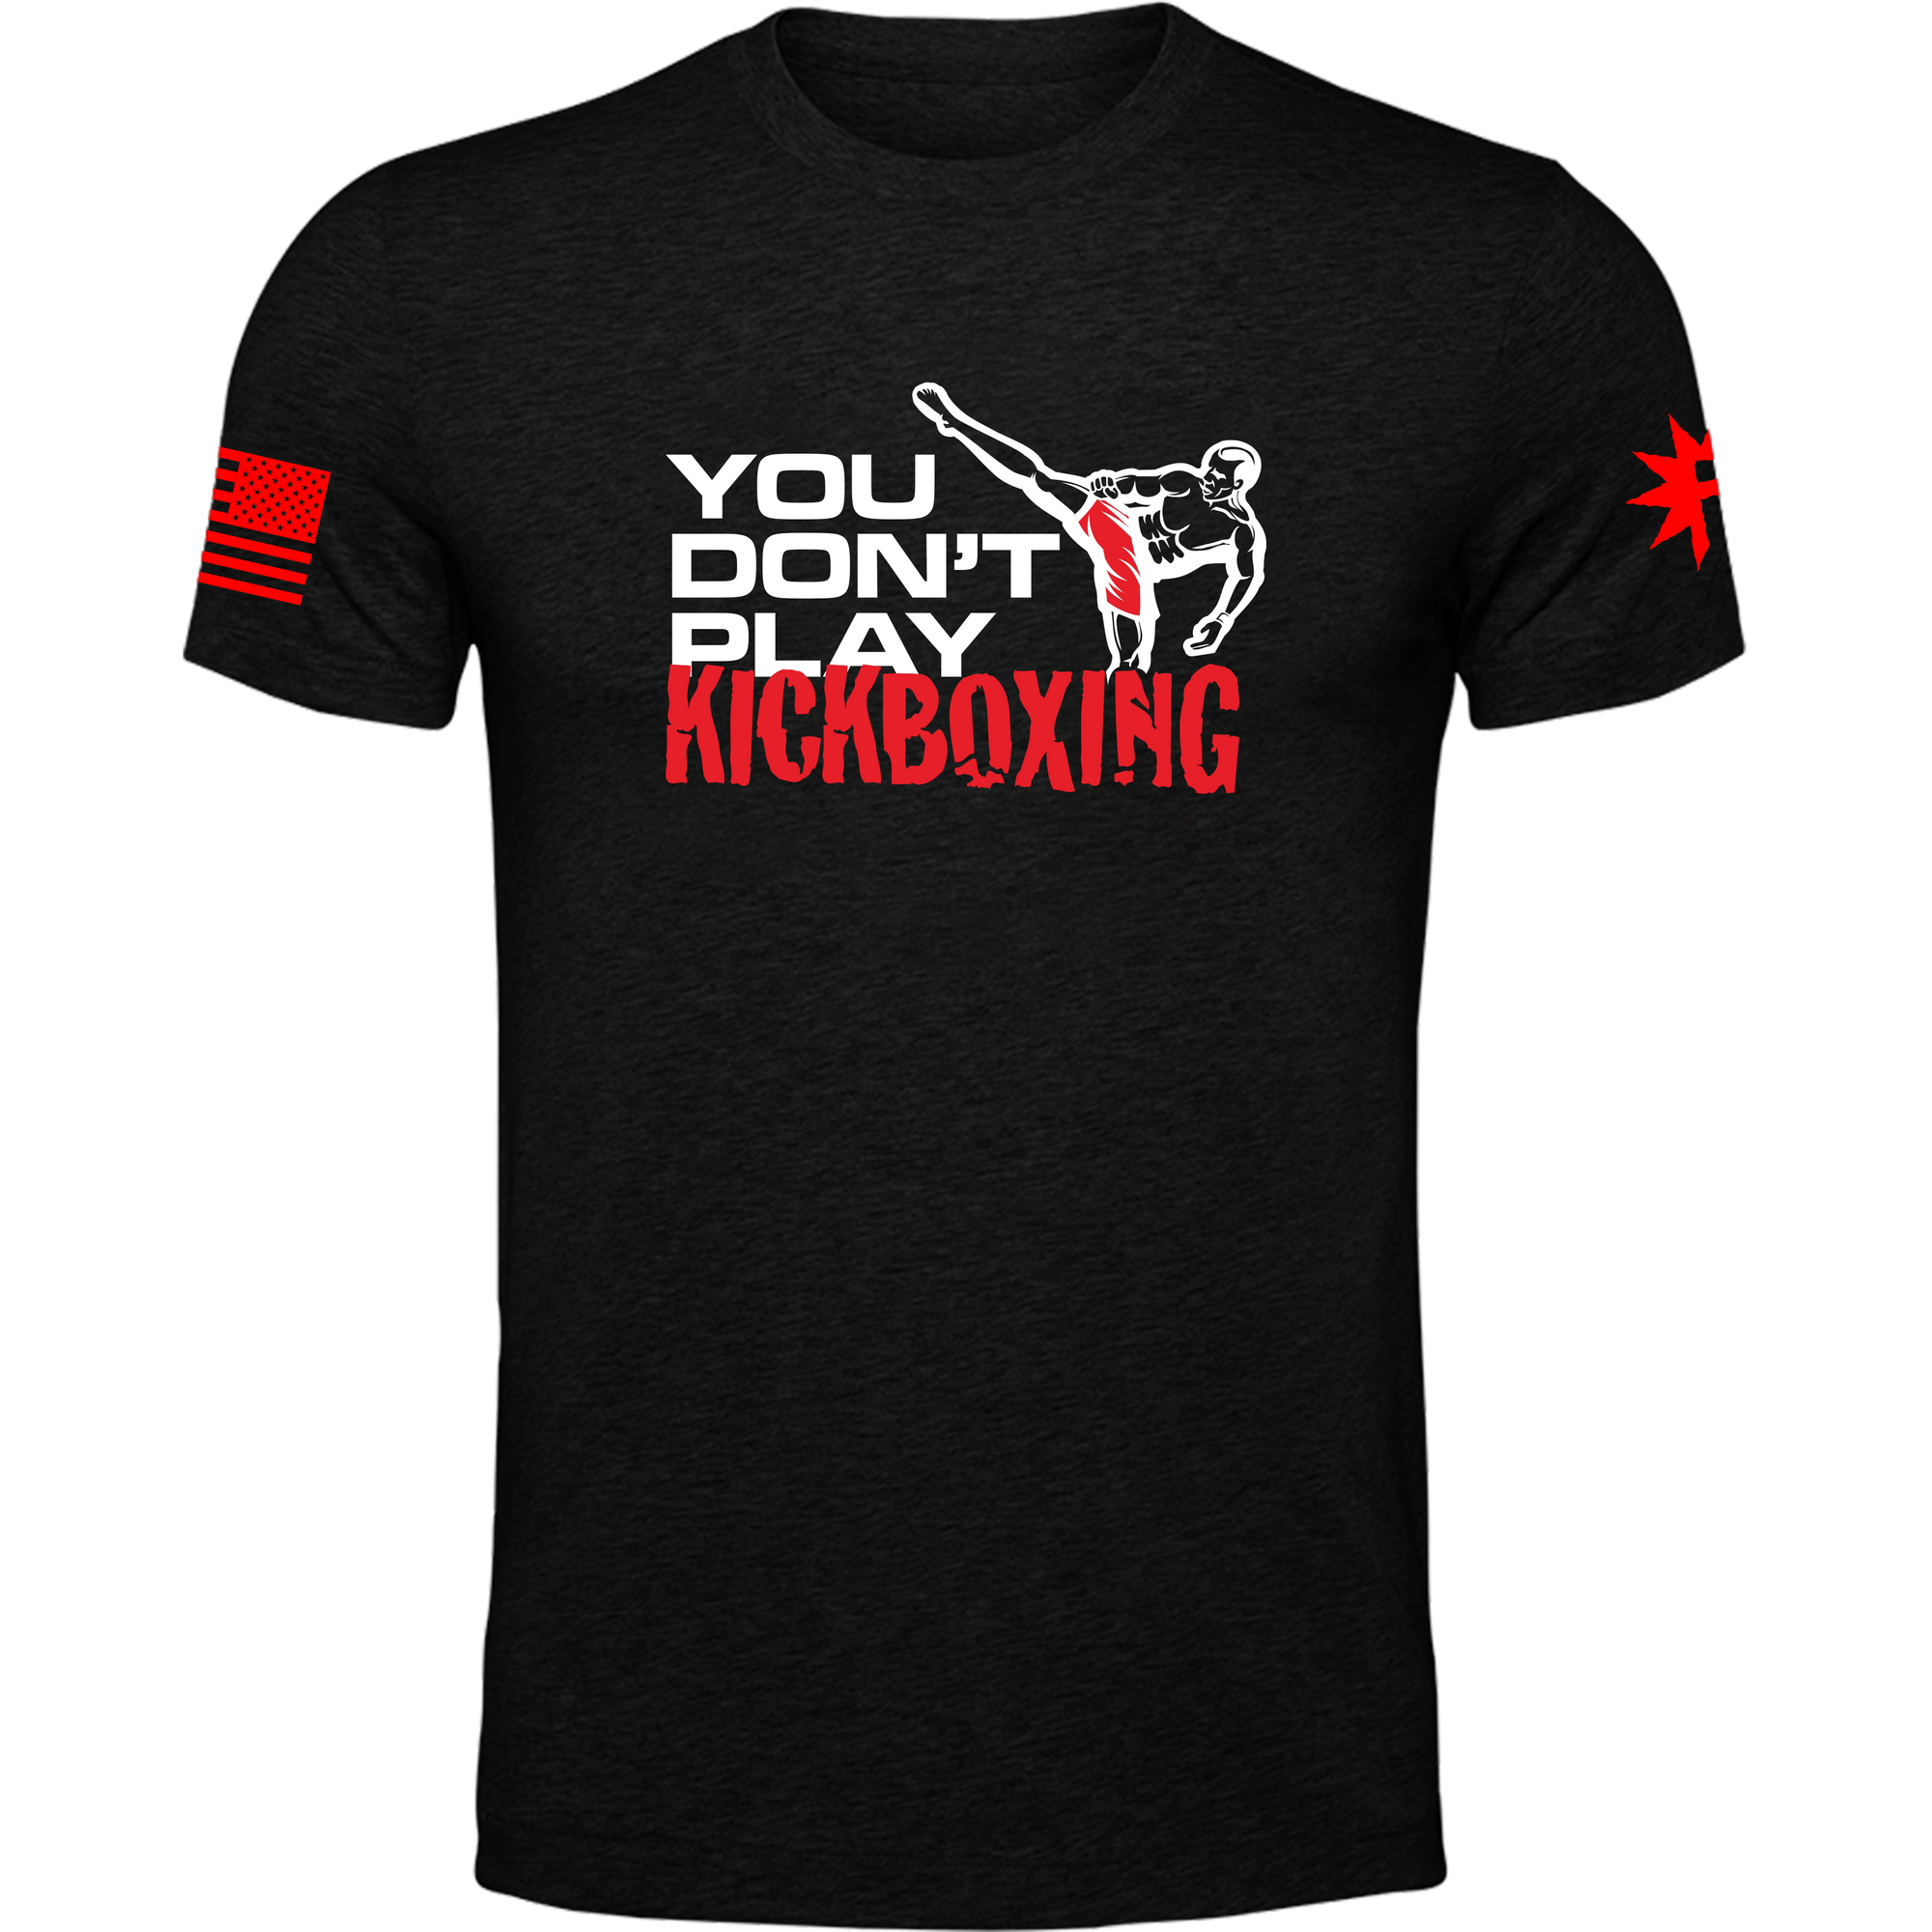 You Don't Play Kickboxing Tee